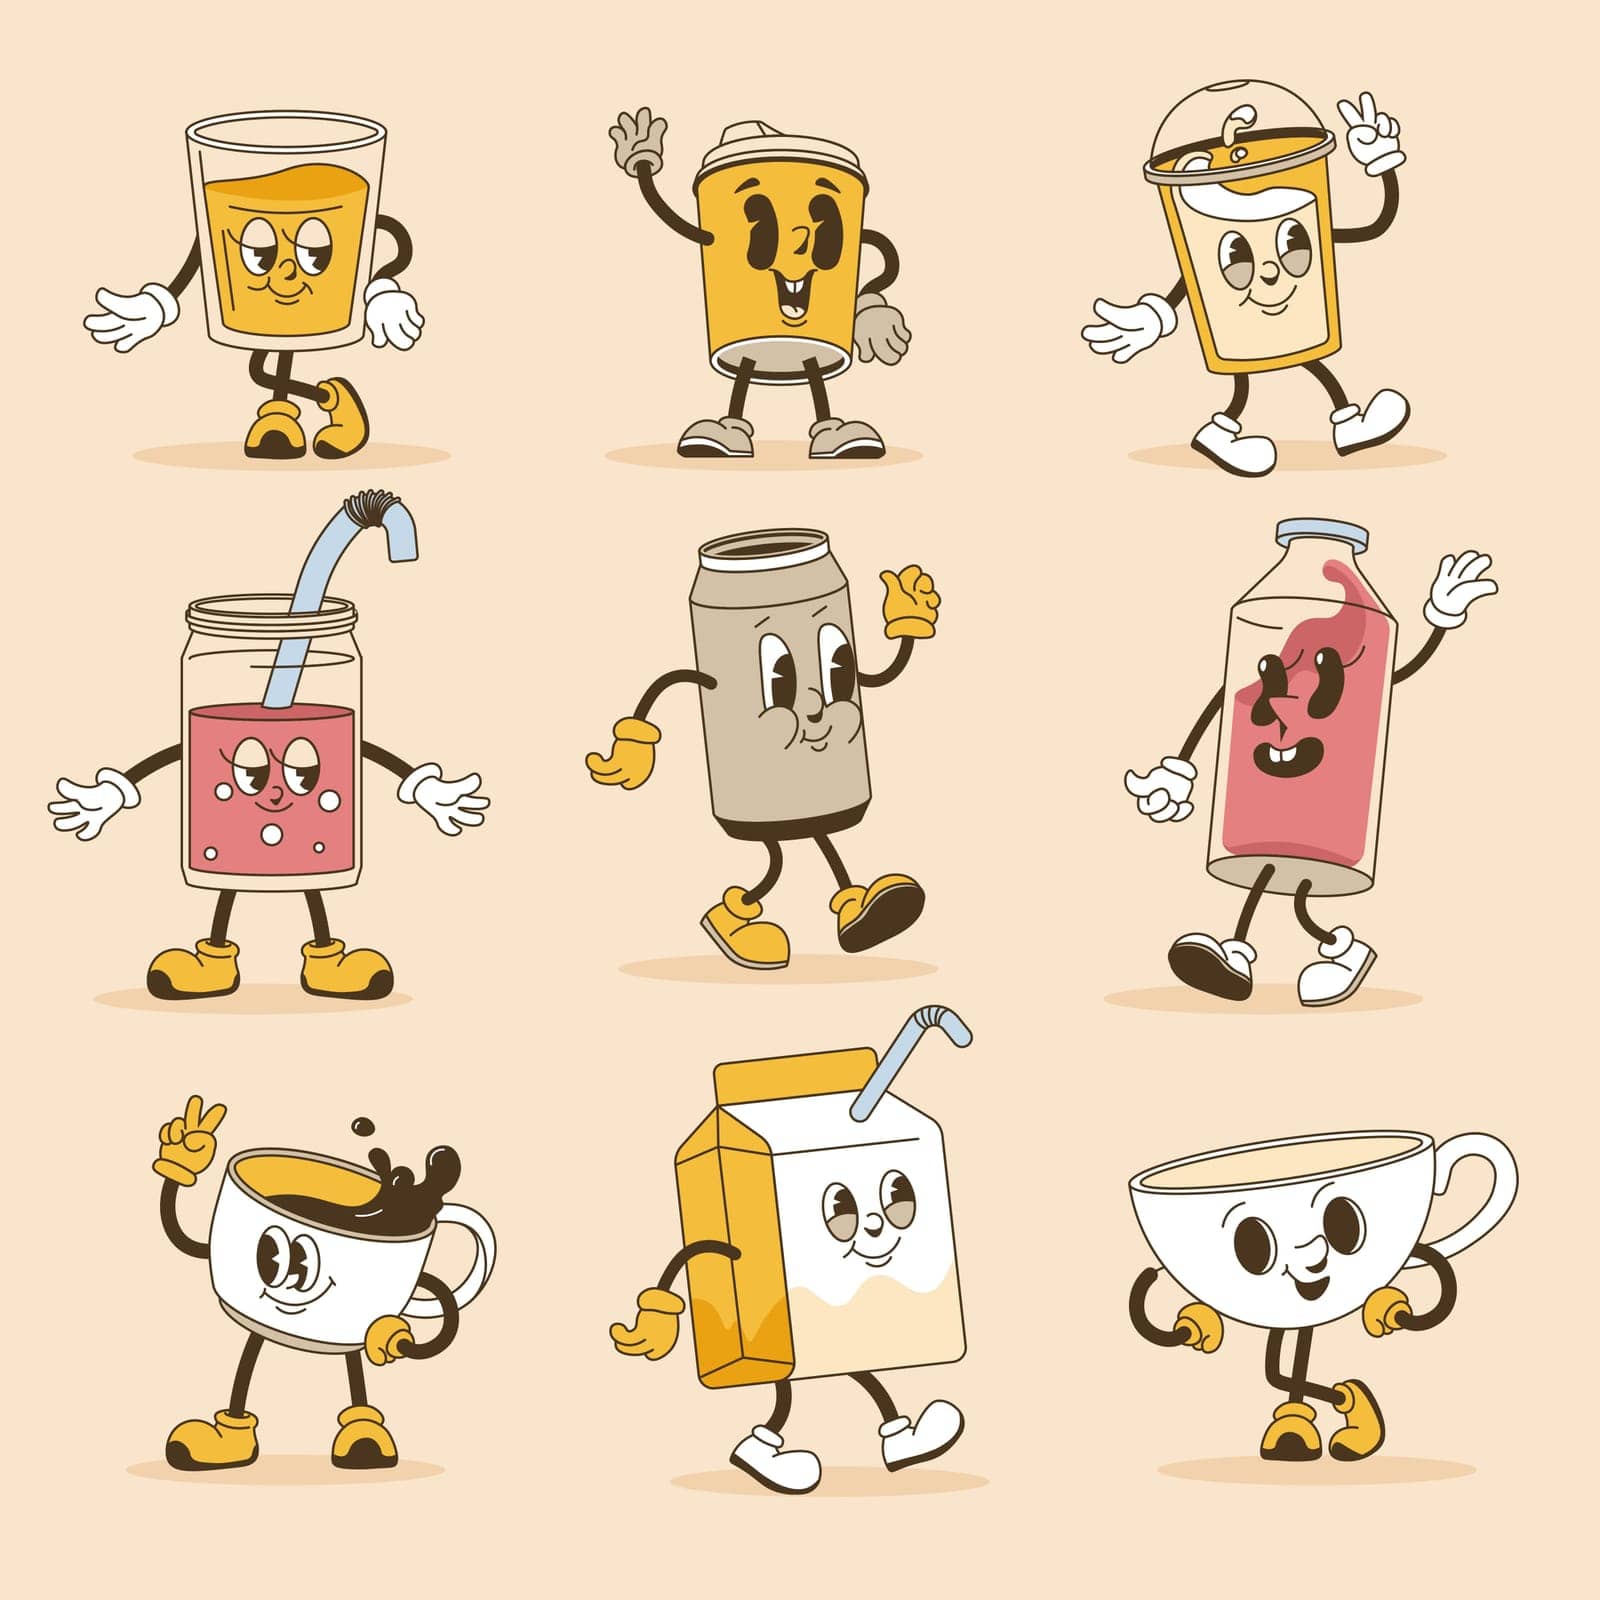 Set of retro cartoon characters. Beverage mascots with positive facial expression. Emoticons for social media chatting. Smiling personages or stickers with hands and legs. Vector in flat style